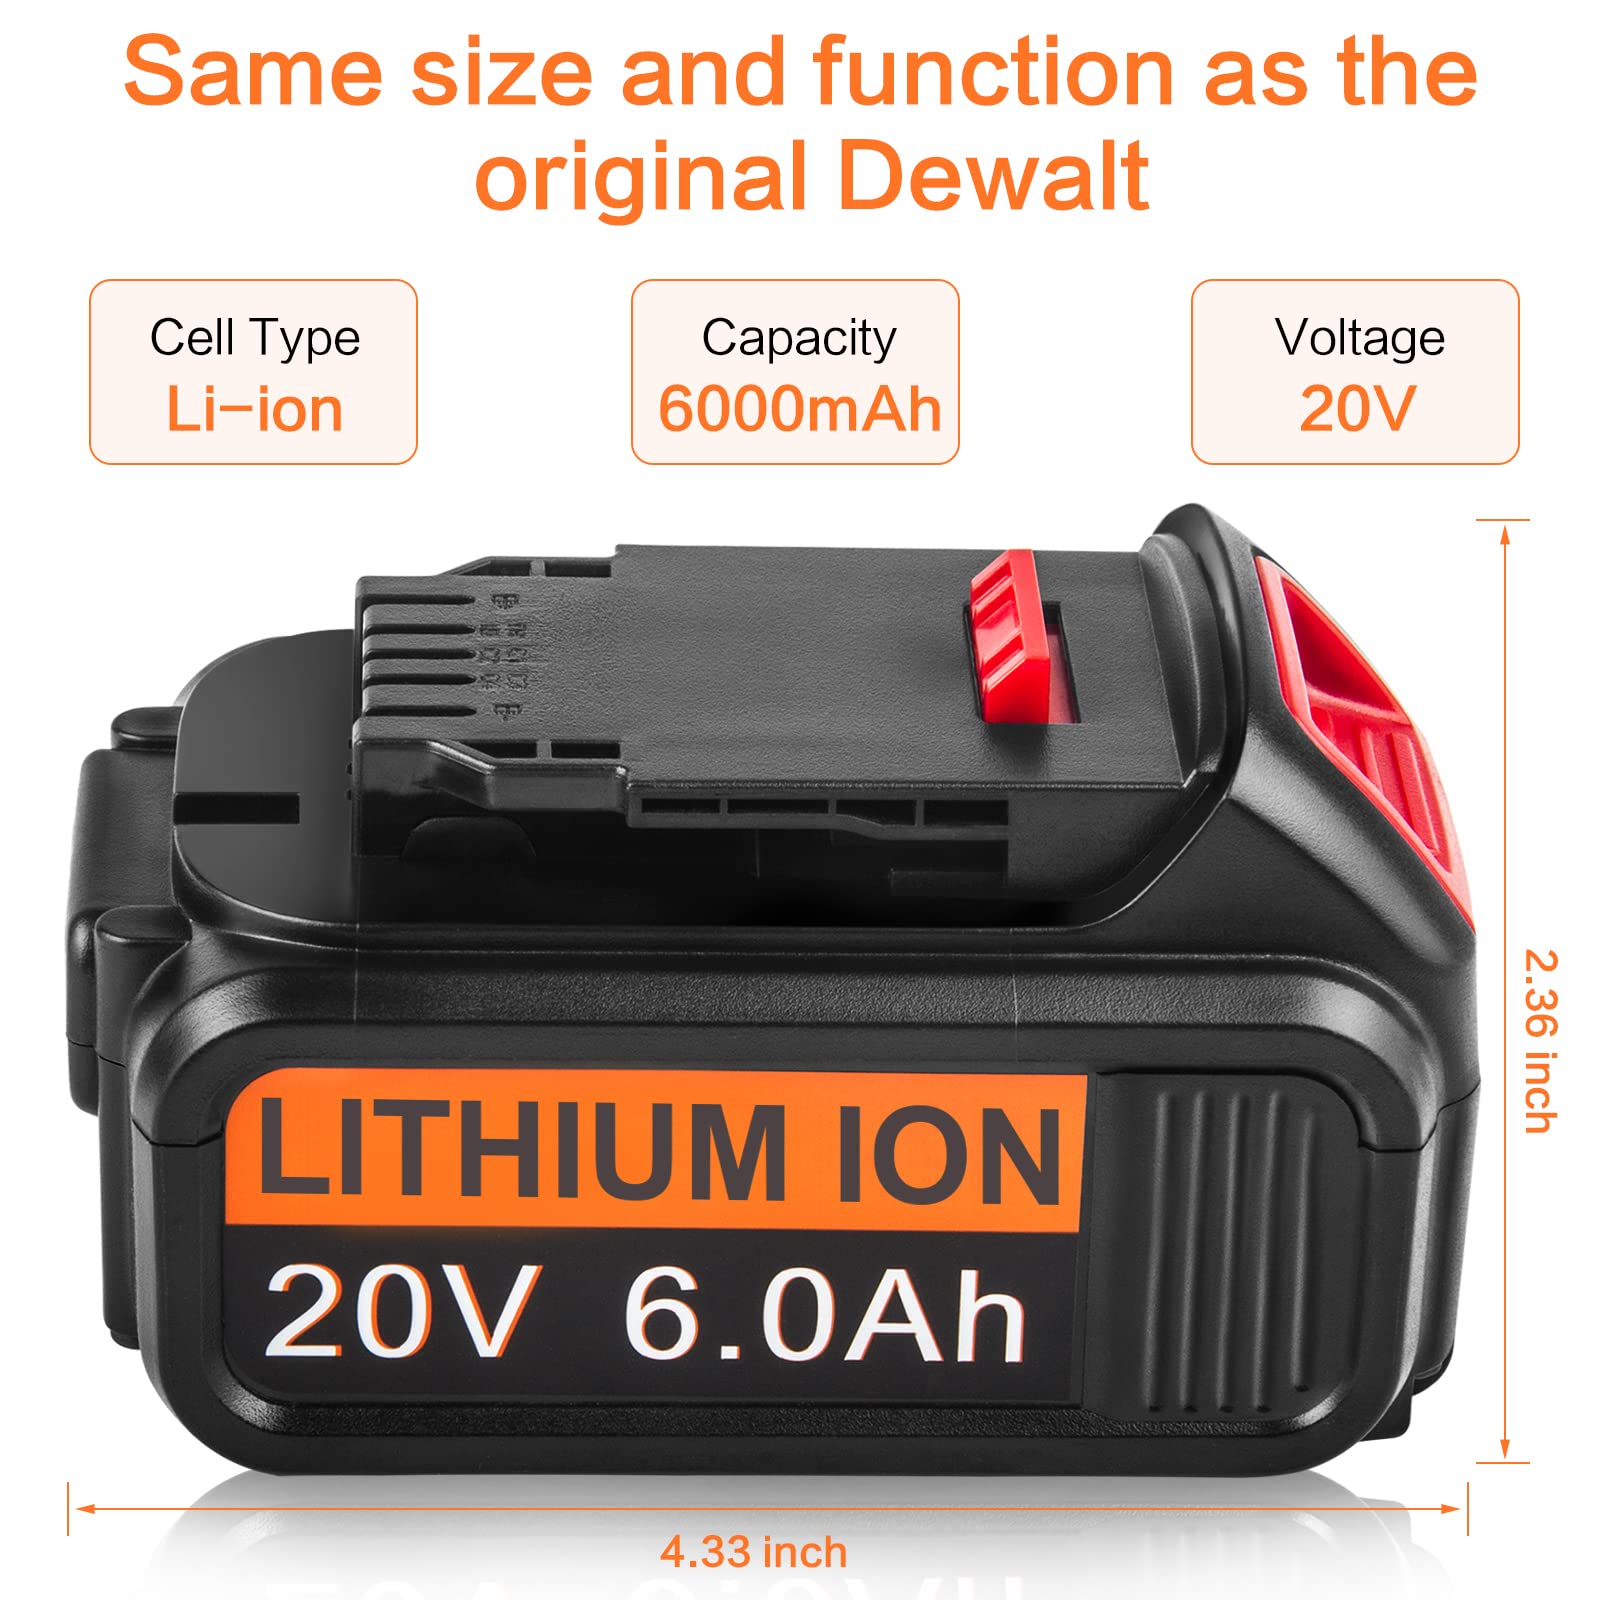 DCB206 20V 6000mAh Lithium Battery Replacement for DeWalt 20V MAX DCB204 DCB200 DCB206 DCB205-2 DCB201 DCB203 DCB181 DCB180 20V DCD/DCF/DCG/DCS Series Cordless Power Tools (2 Packs 6000mAh)